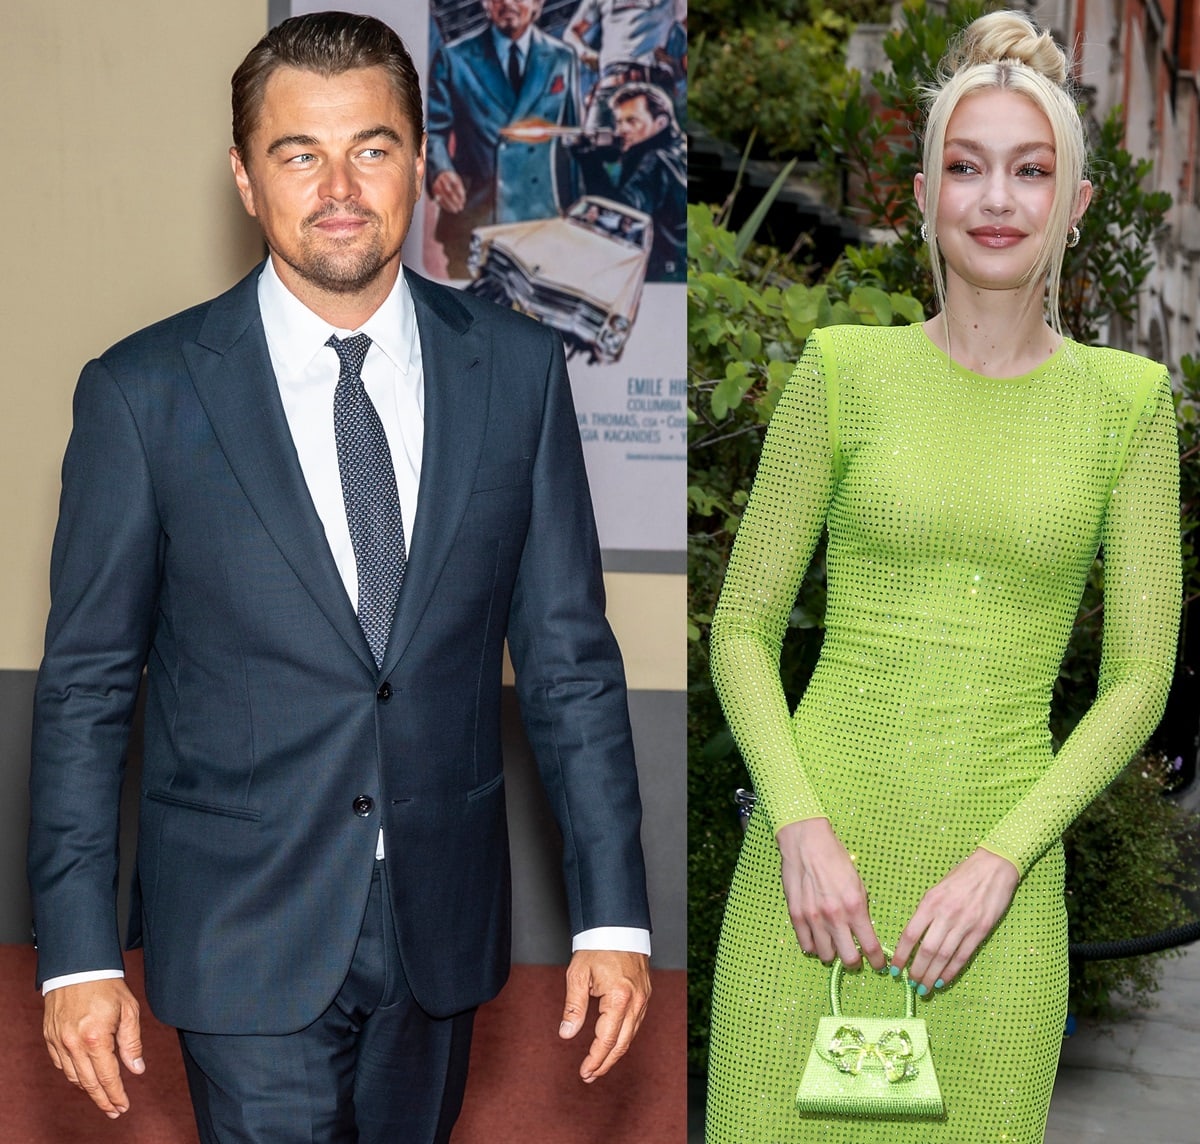 Their appearance together at a pre-Oscars party reignited rumors about a possible romance between Leonardo DiCaprio and Gigi Hadid, who first grabbed attention when they were seen together at a New York Fashion Week afterparty in September 2022